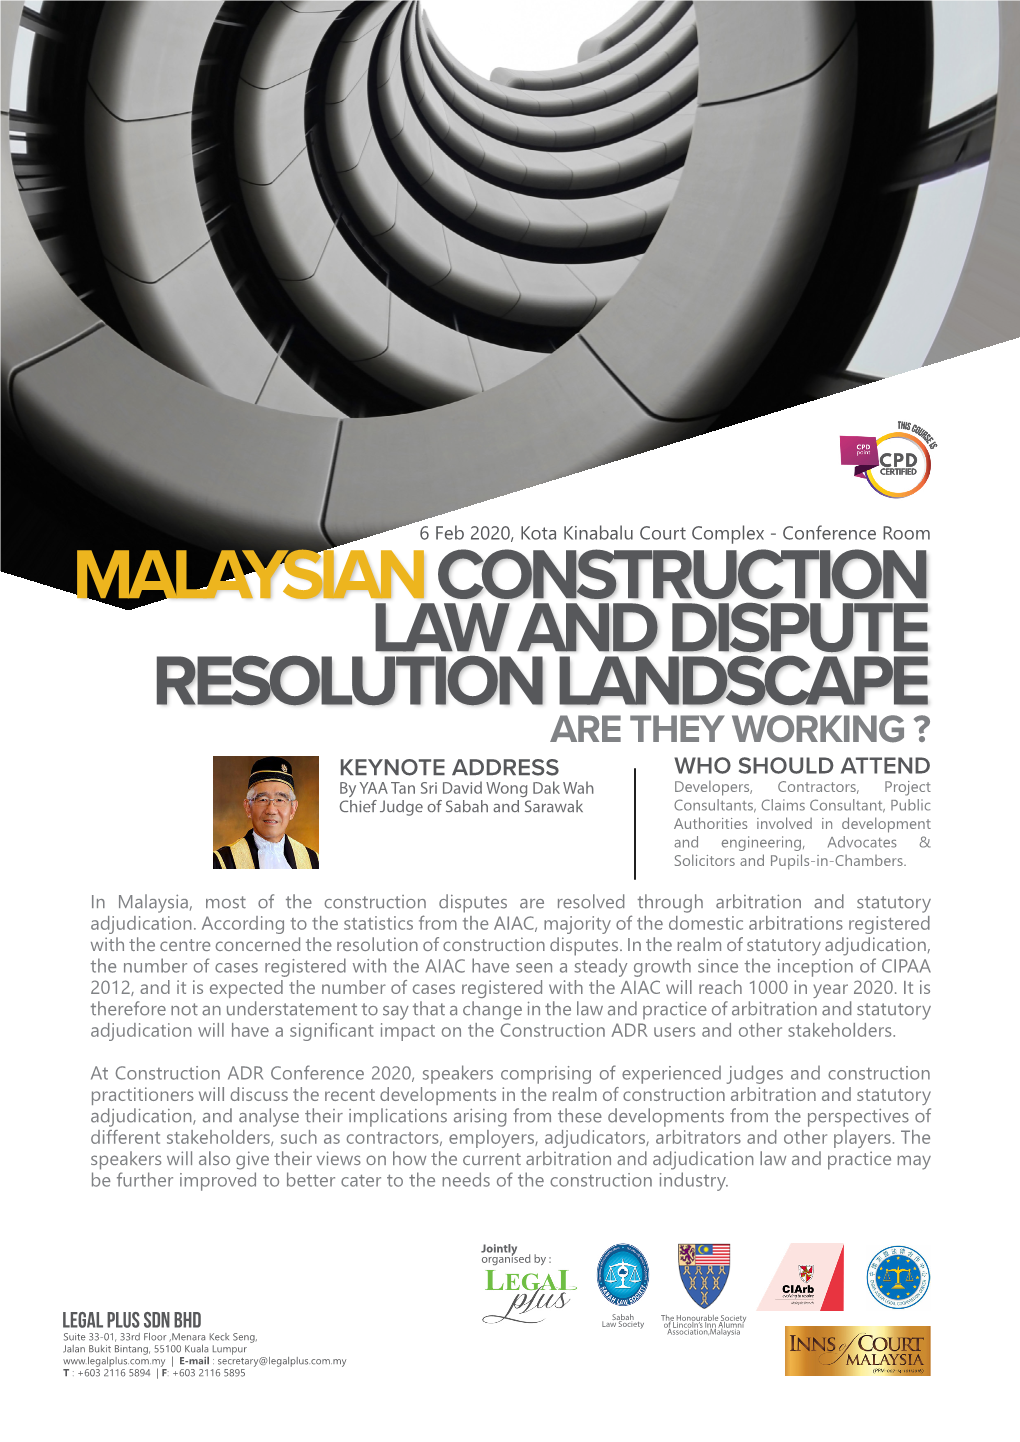 Malaysianconstruction Law and Dispute Resolution Landscape